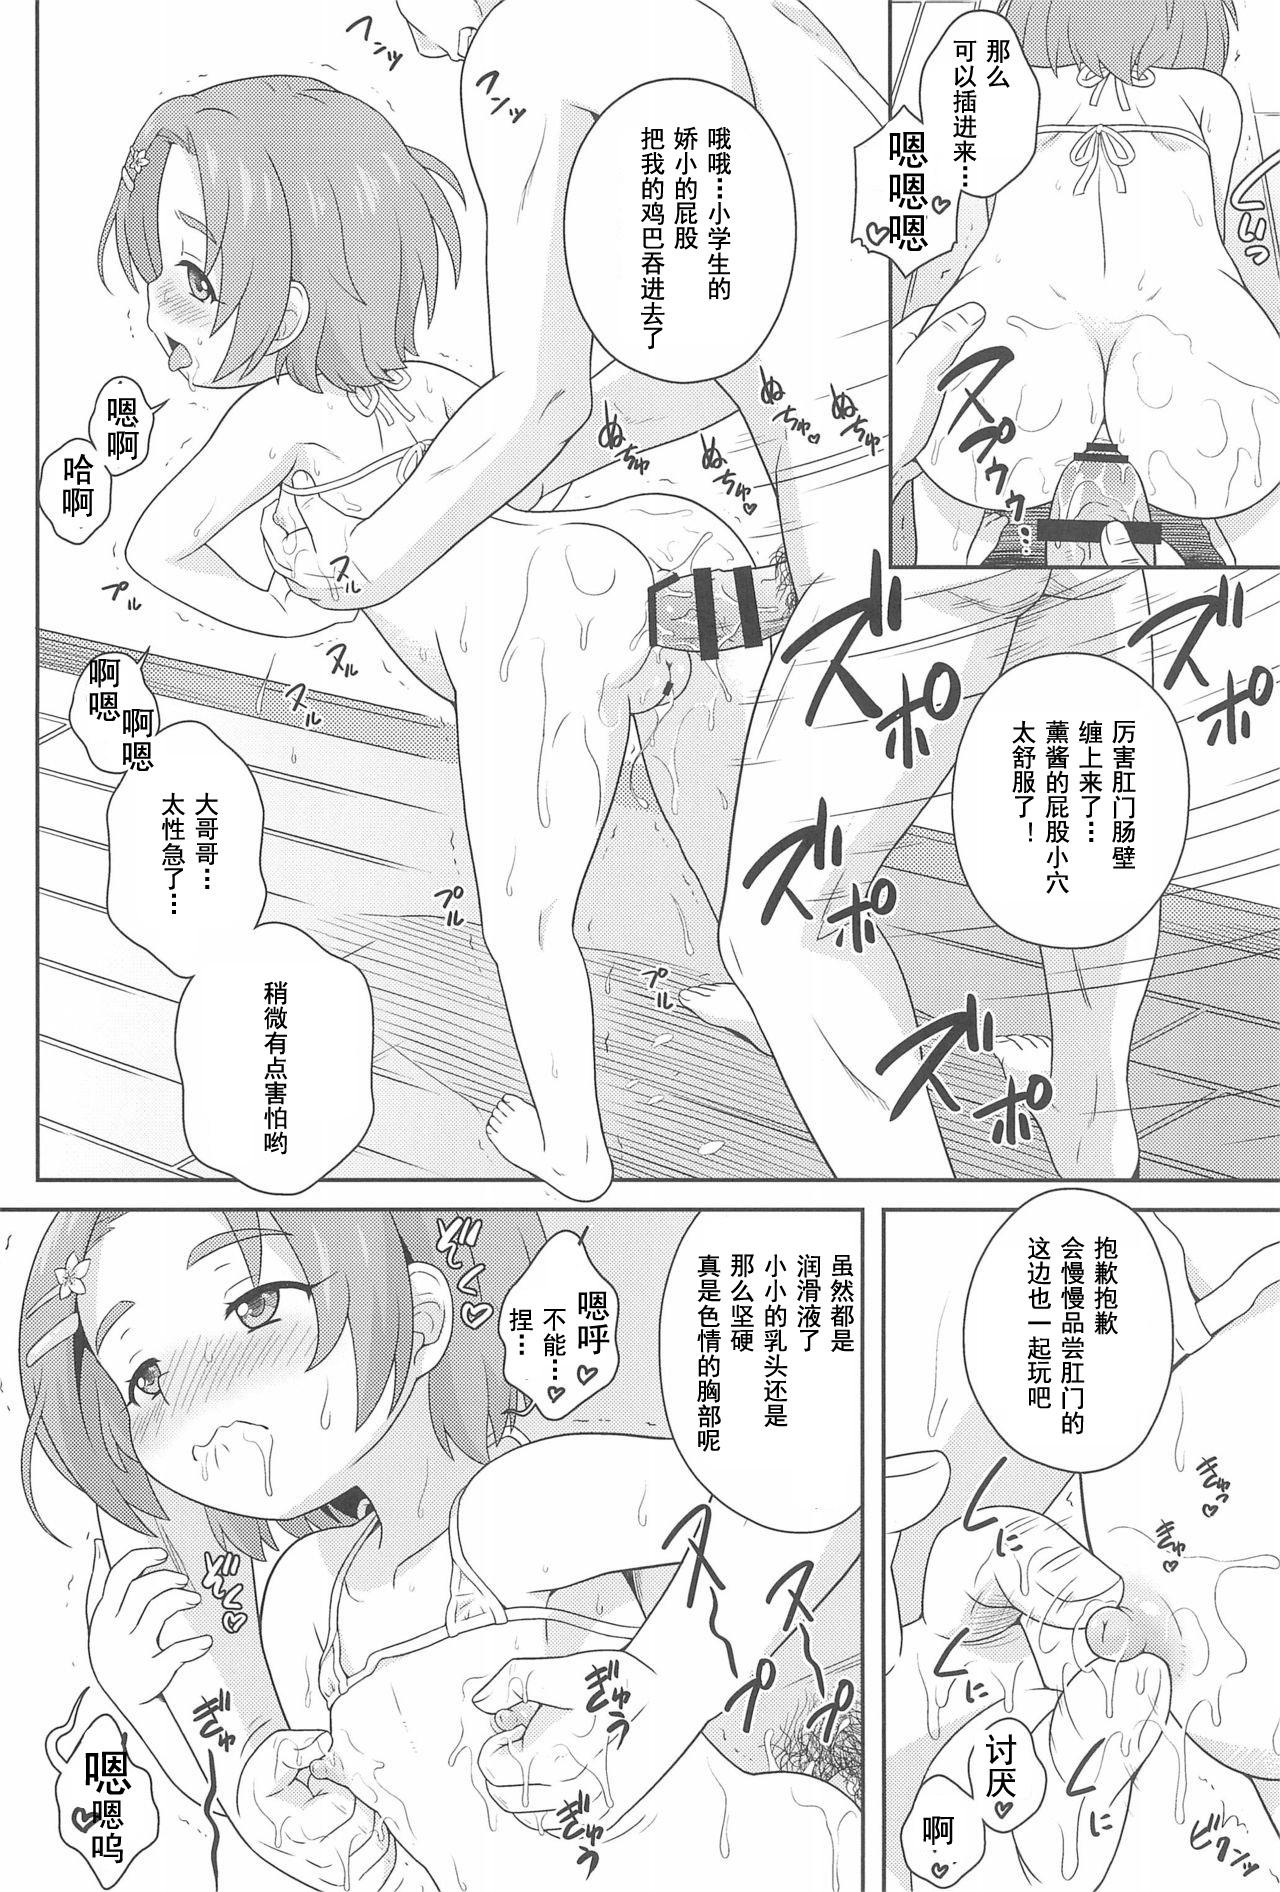 Ejaculations Delivery Days Futsukame→ - The idolmaster Twistys - Page 8